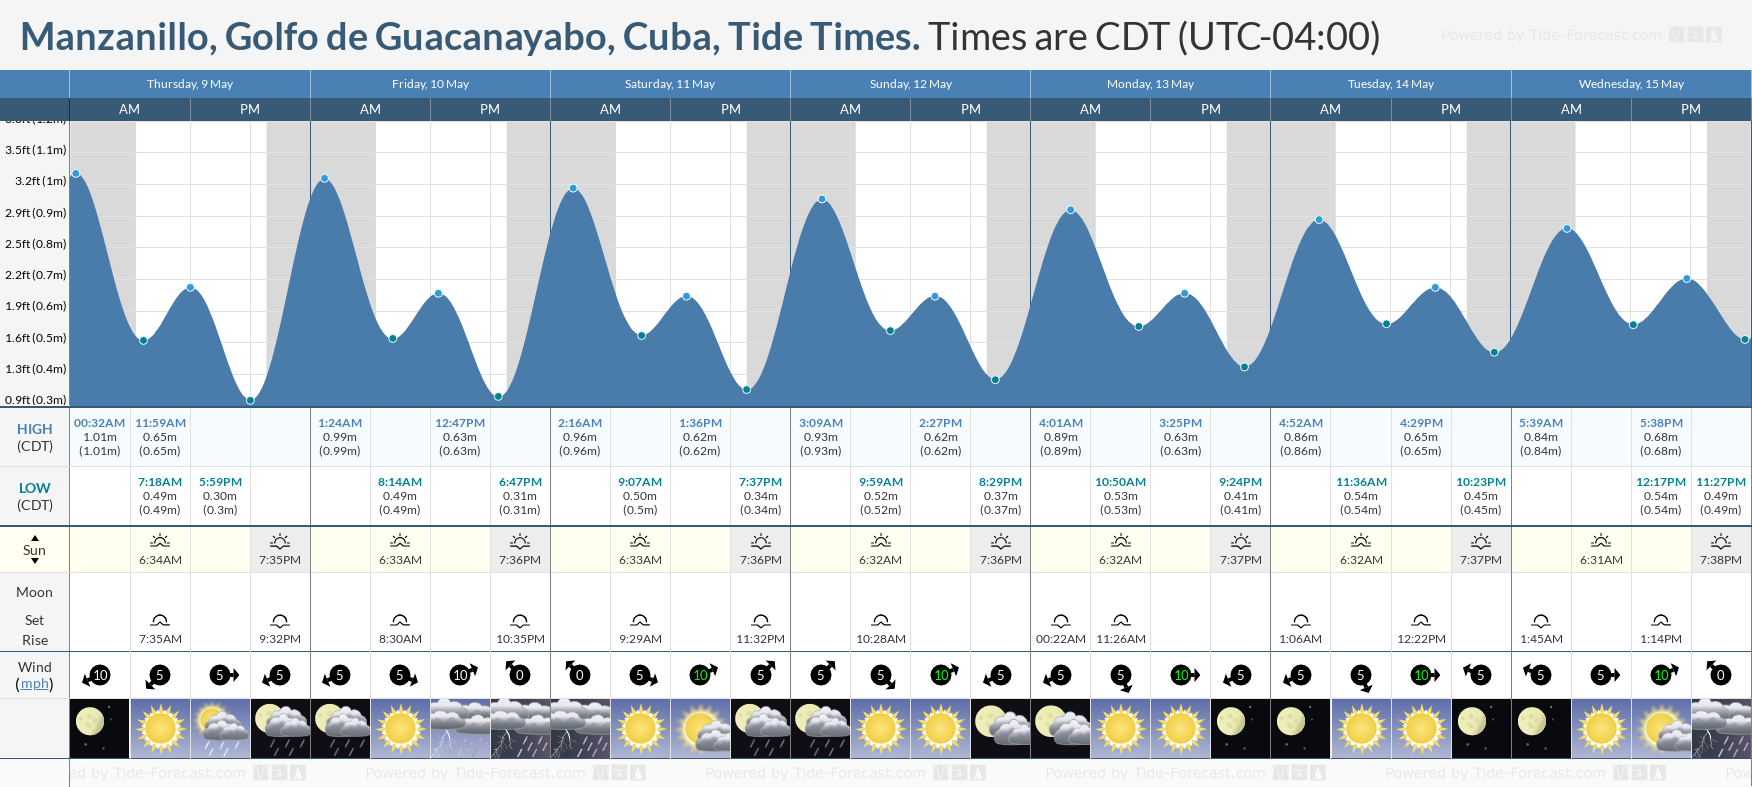 Manzanillo, Golfo de Guacanayabo, Cuba Tide Chart including high and low tide times for the next 7 days